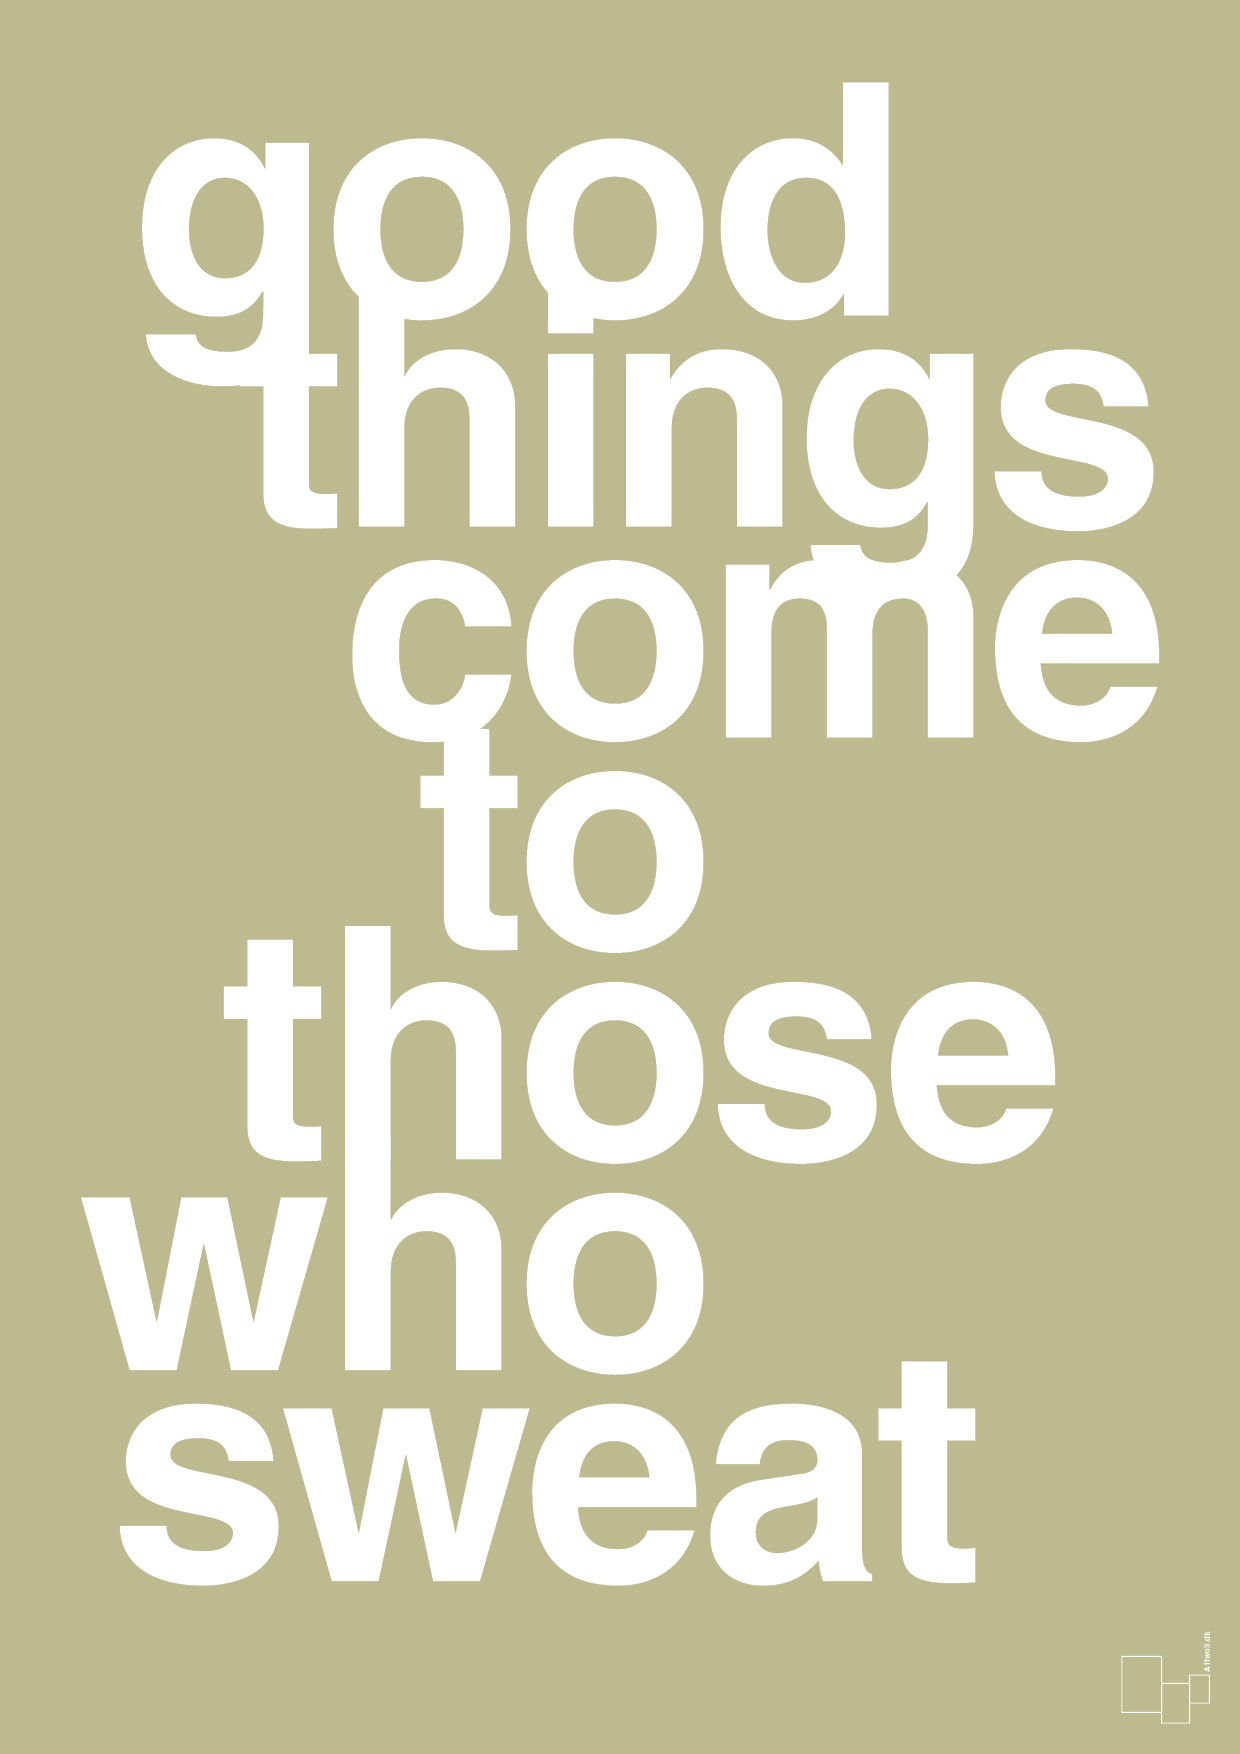 good things come to those who sweat - Plakat med Sport & Fritid i Back to Nature